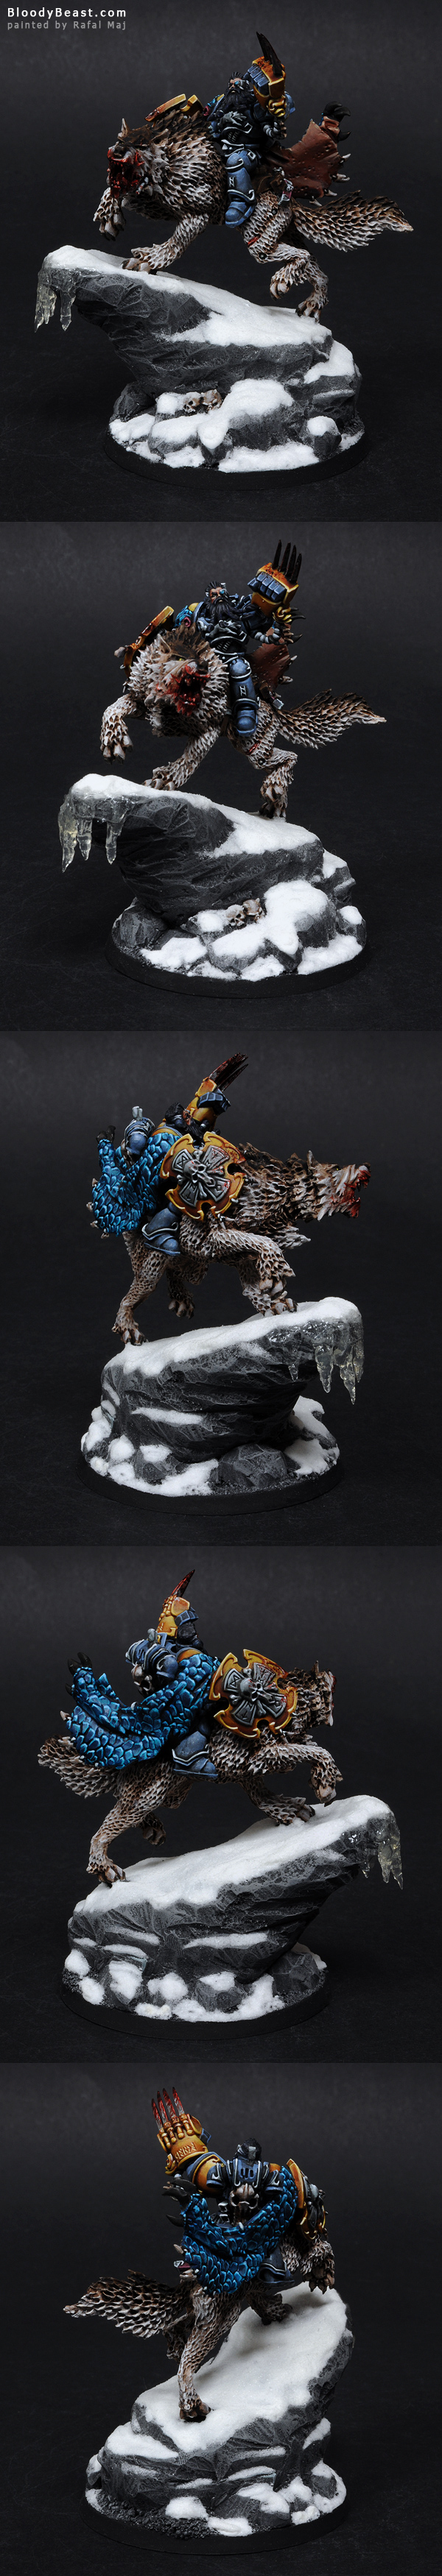 Space Wolves Thunderwolf Lord painted by Rafal Maj (BloodyBeast.com)